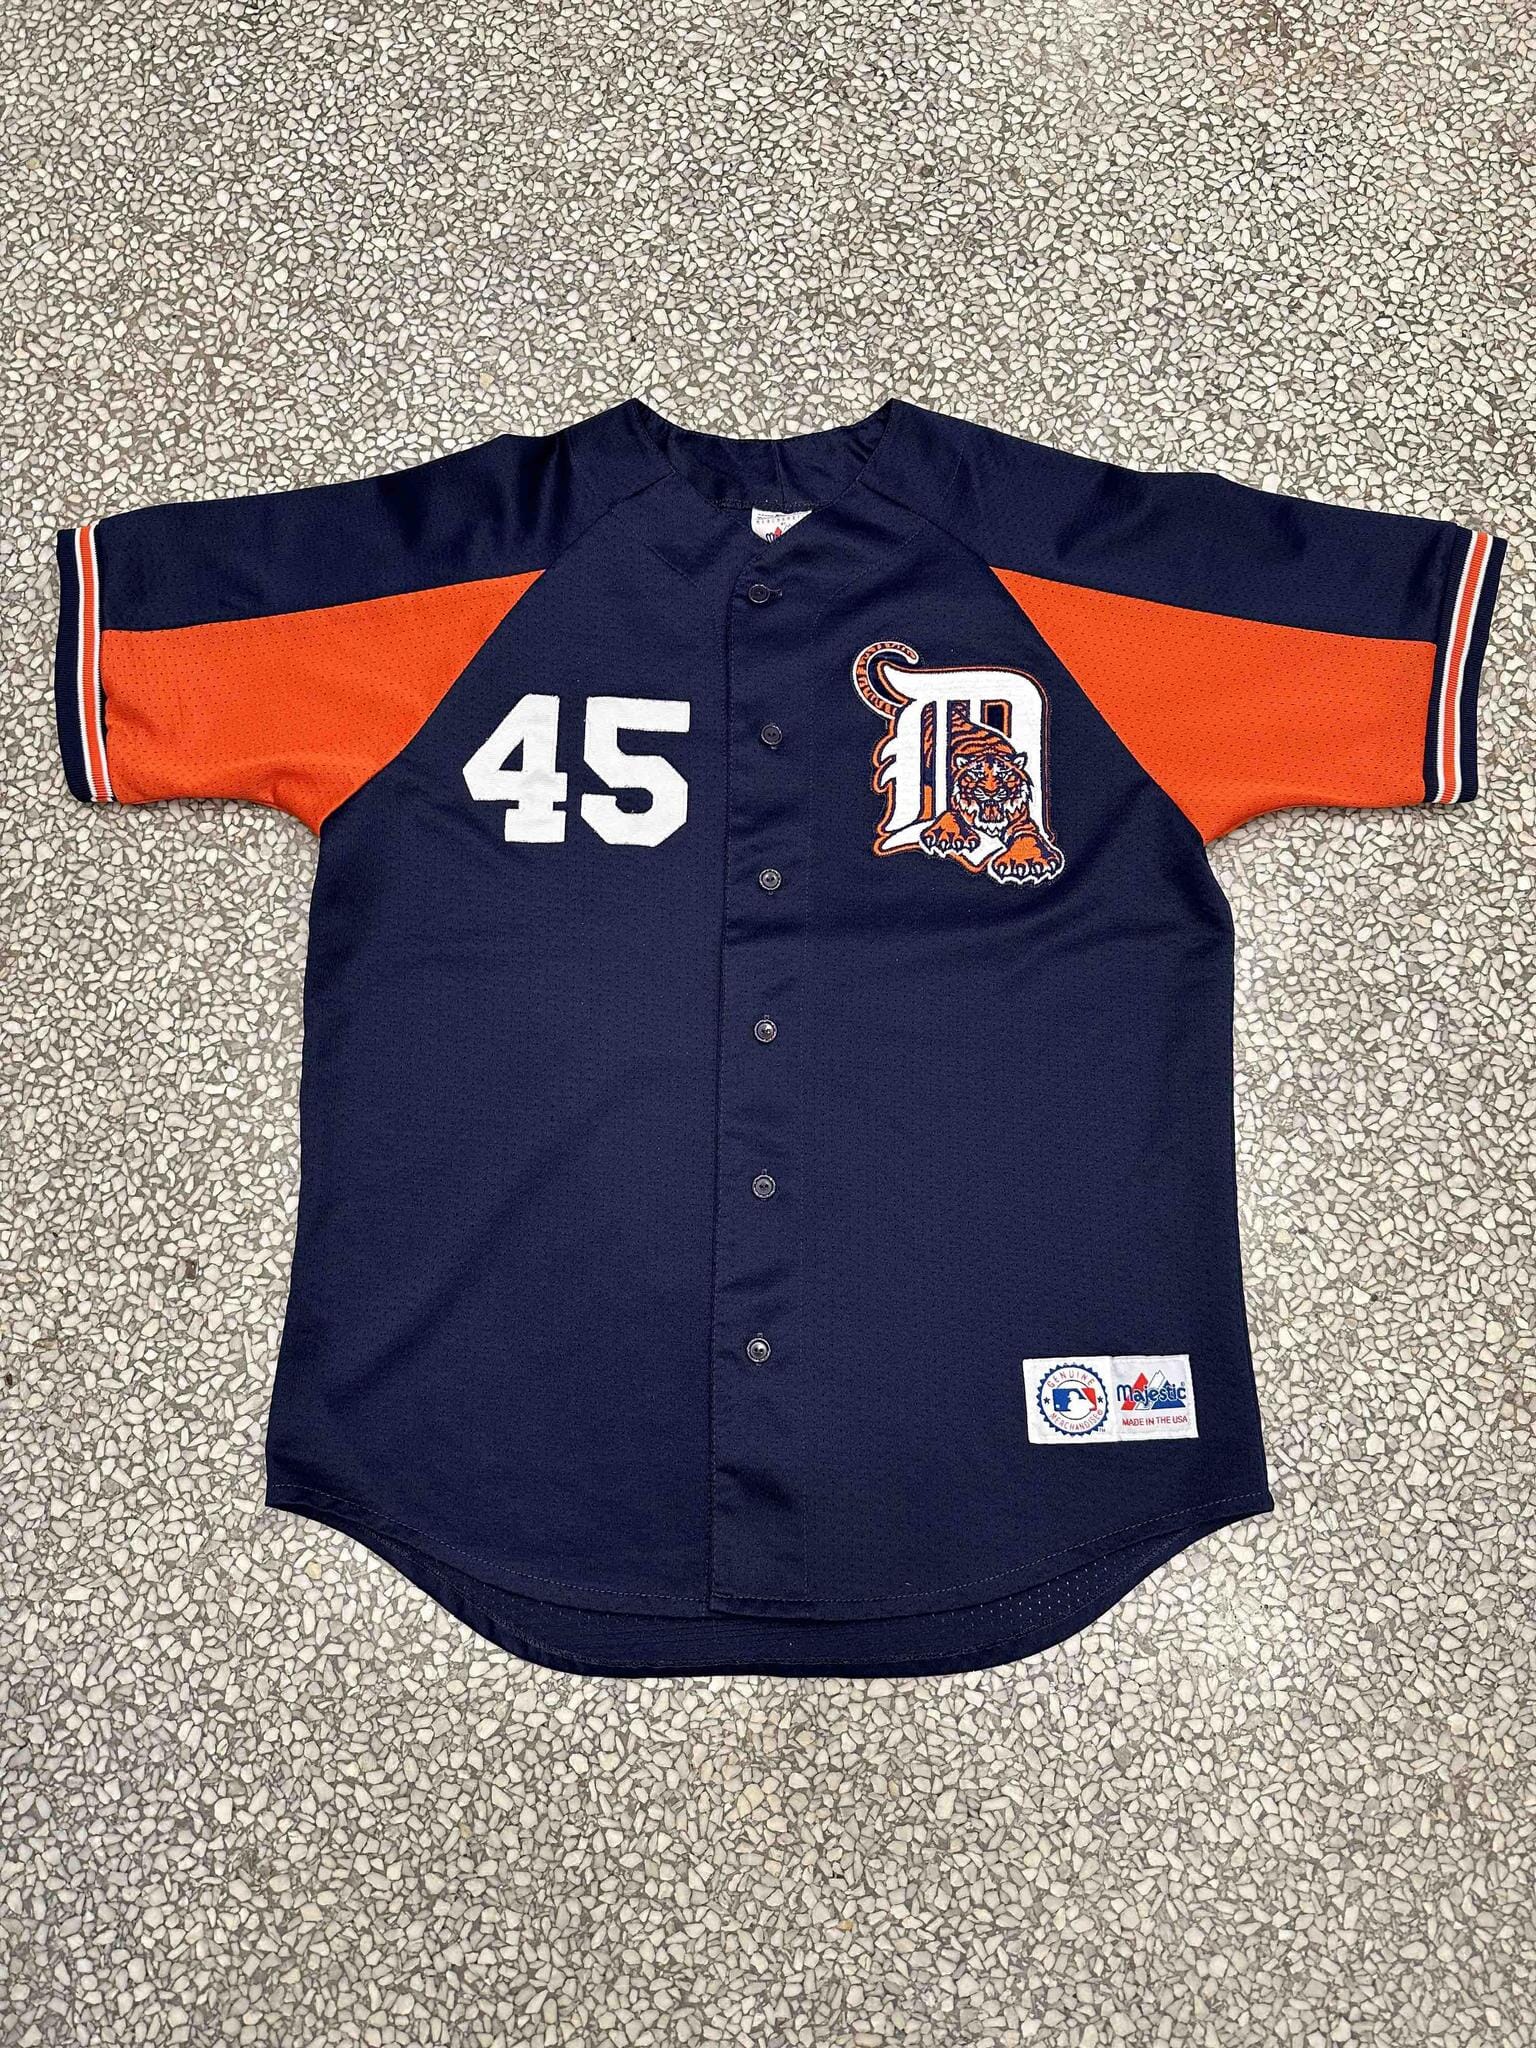 Cecil Fielder Jersey - Detroit Tigers 1990 Home Throwback MLB Baseball  Jersey